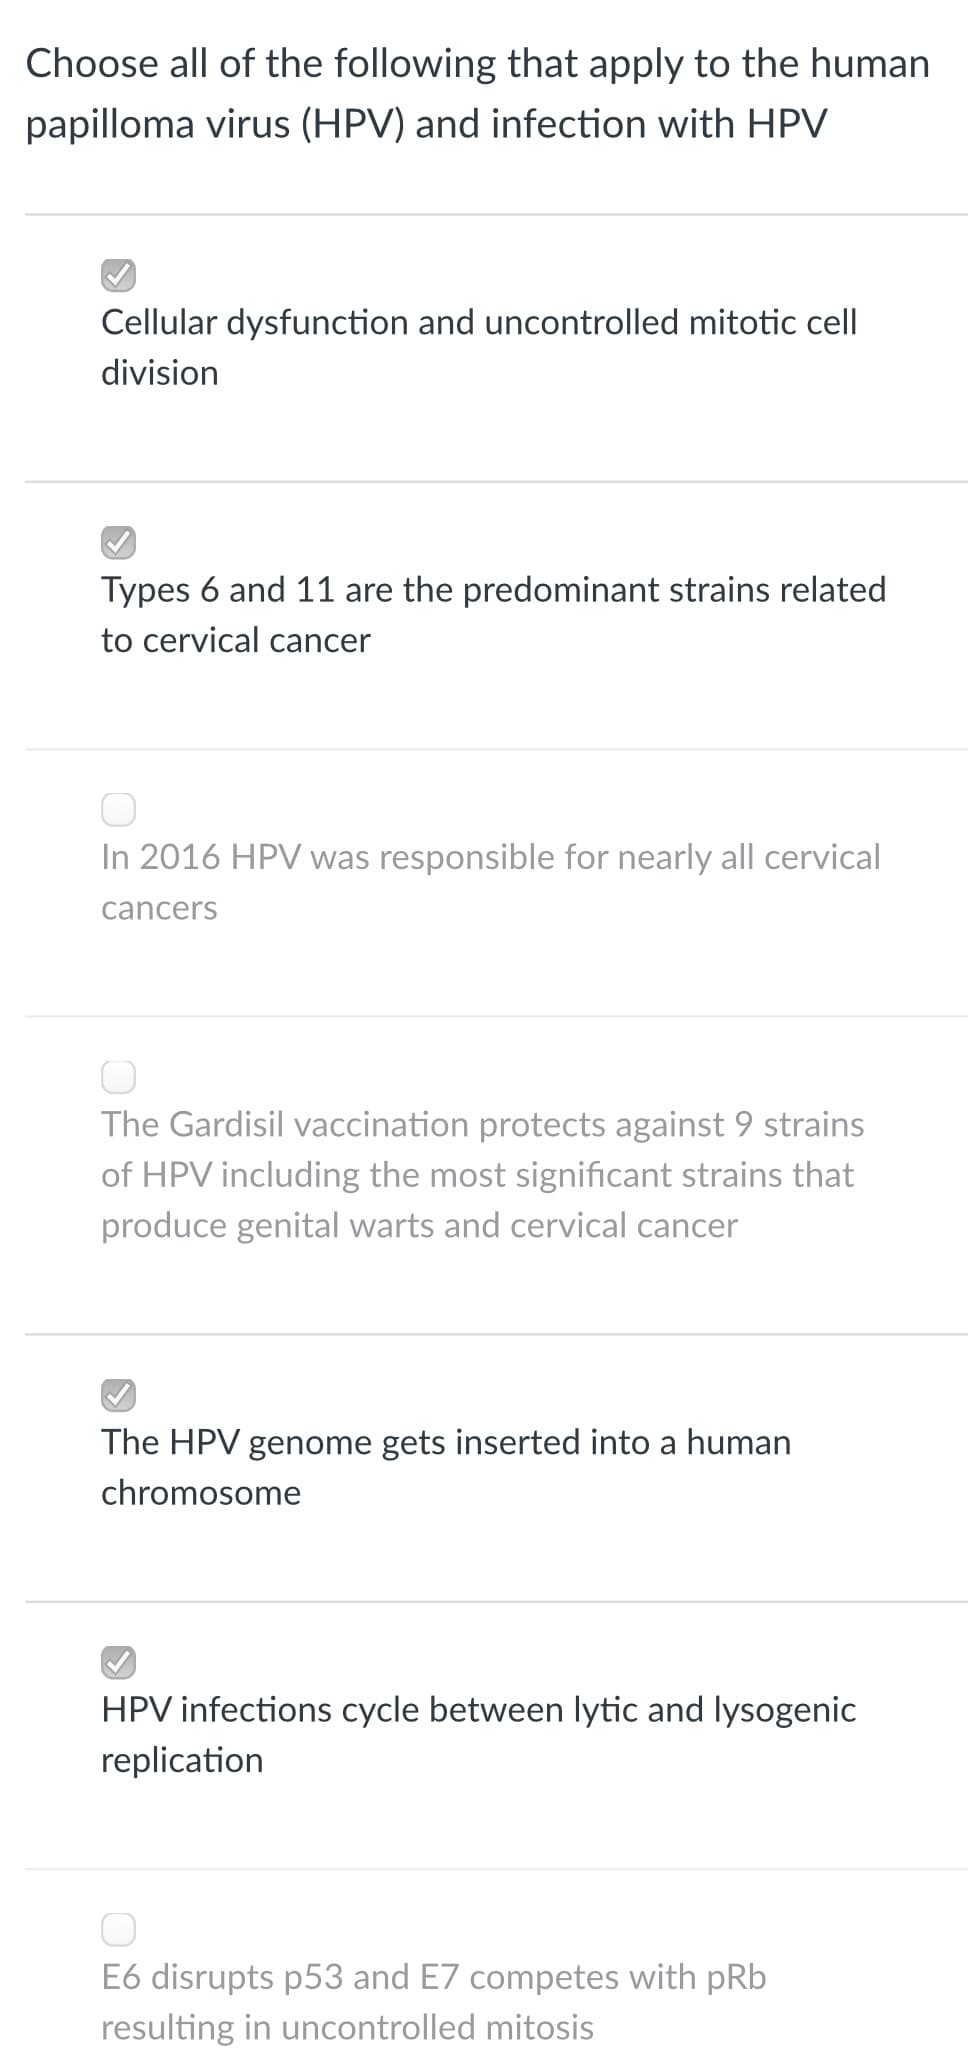 Choose all of the following that apply to the human
papilloma virus (HPV) and infection with HPV
Cellular dysfunction and uncontrolled mitotic cell
division
Types 6 and 11 are the predominant strains related
to cervical cancer
In 2016 HPV was responsible for nearly all cervical
cancers
The Gardisil vaccination protects against 9 strains
of HPV including the most significant strains that
produce genital warts and cervical cancer
The HPV genome gets inserted into a human
chromosome
HPV infections cycle between lytic and lysogenic
replication
E6 disrupts p53 and E7 competes with pRb
resulting in uncontrolled mitosis
